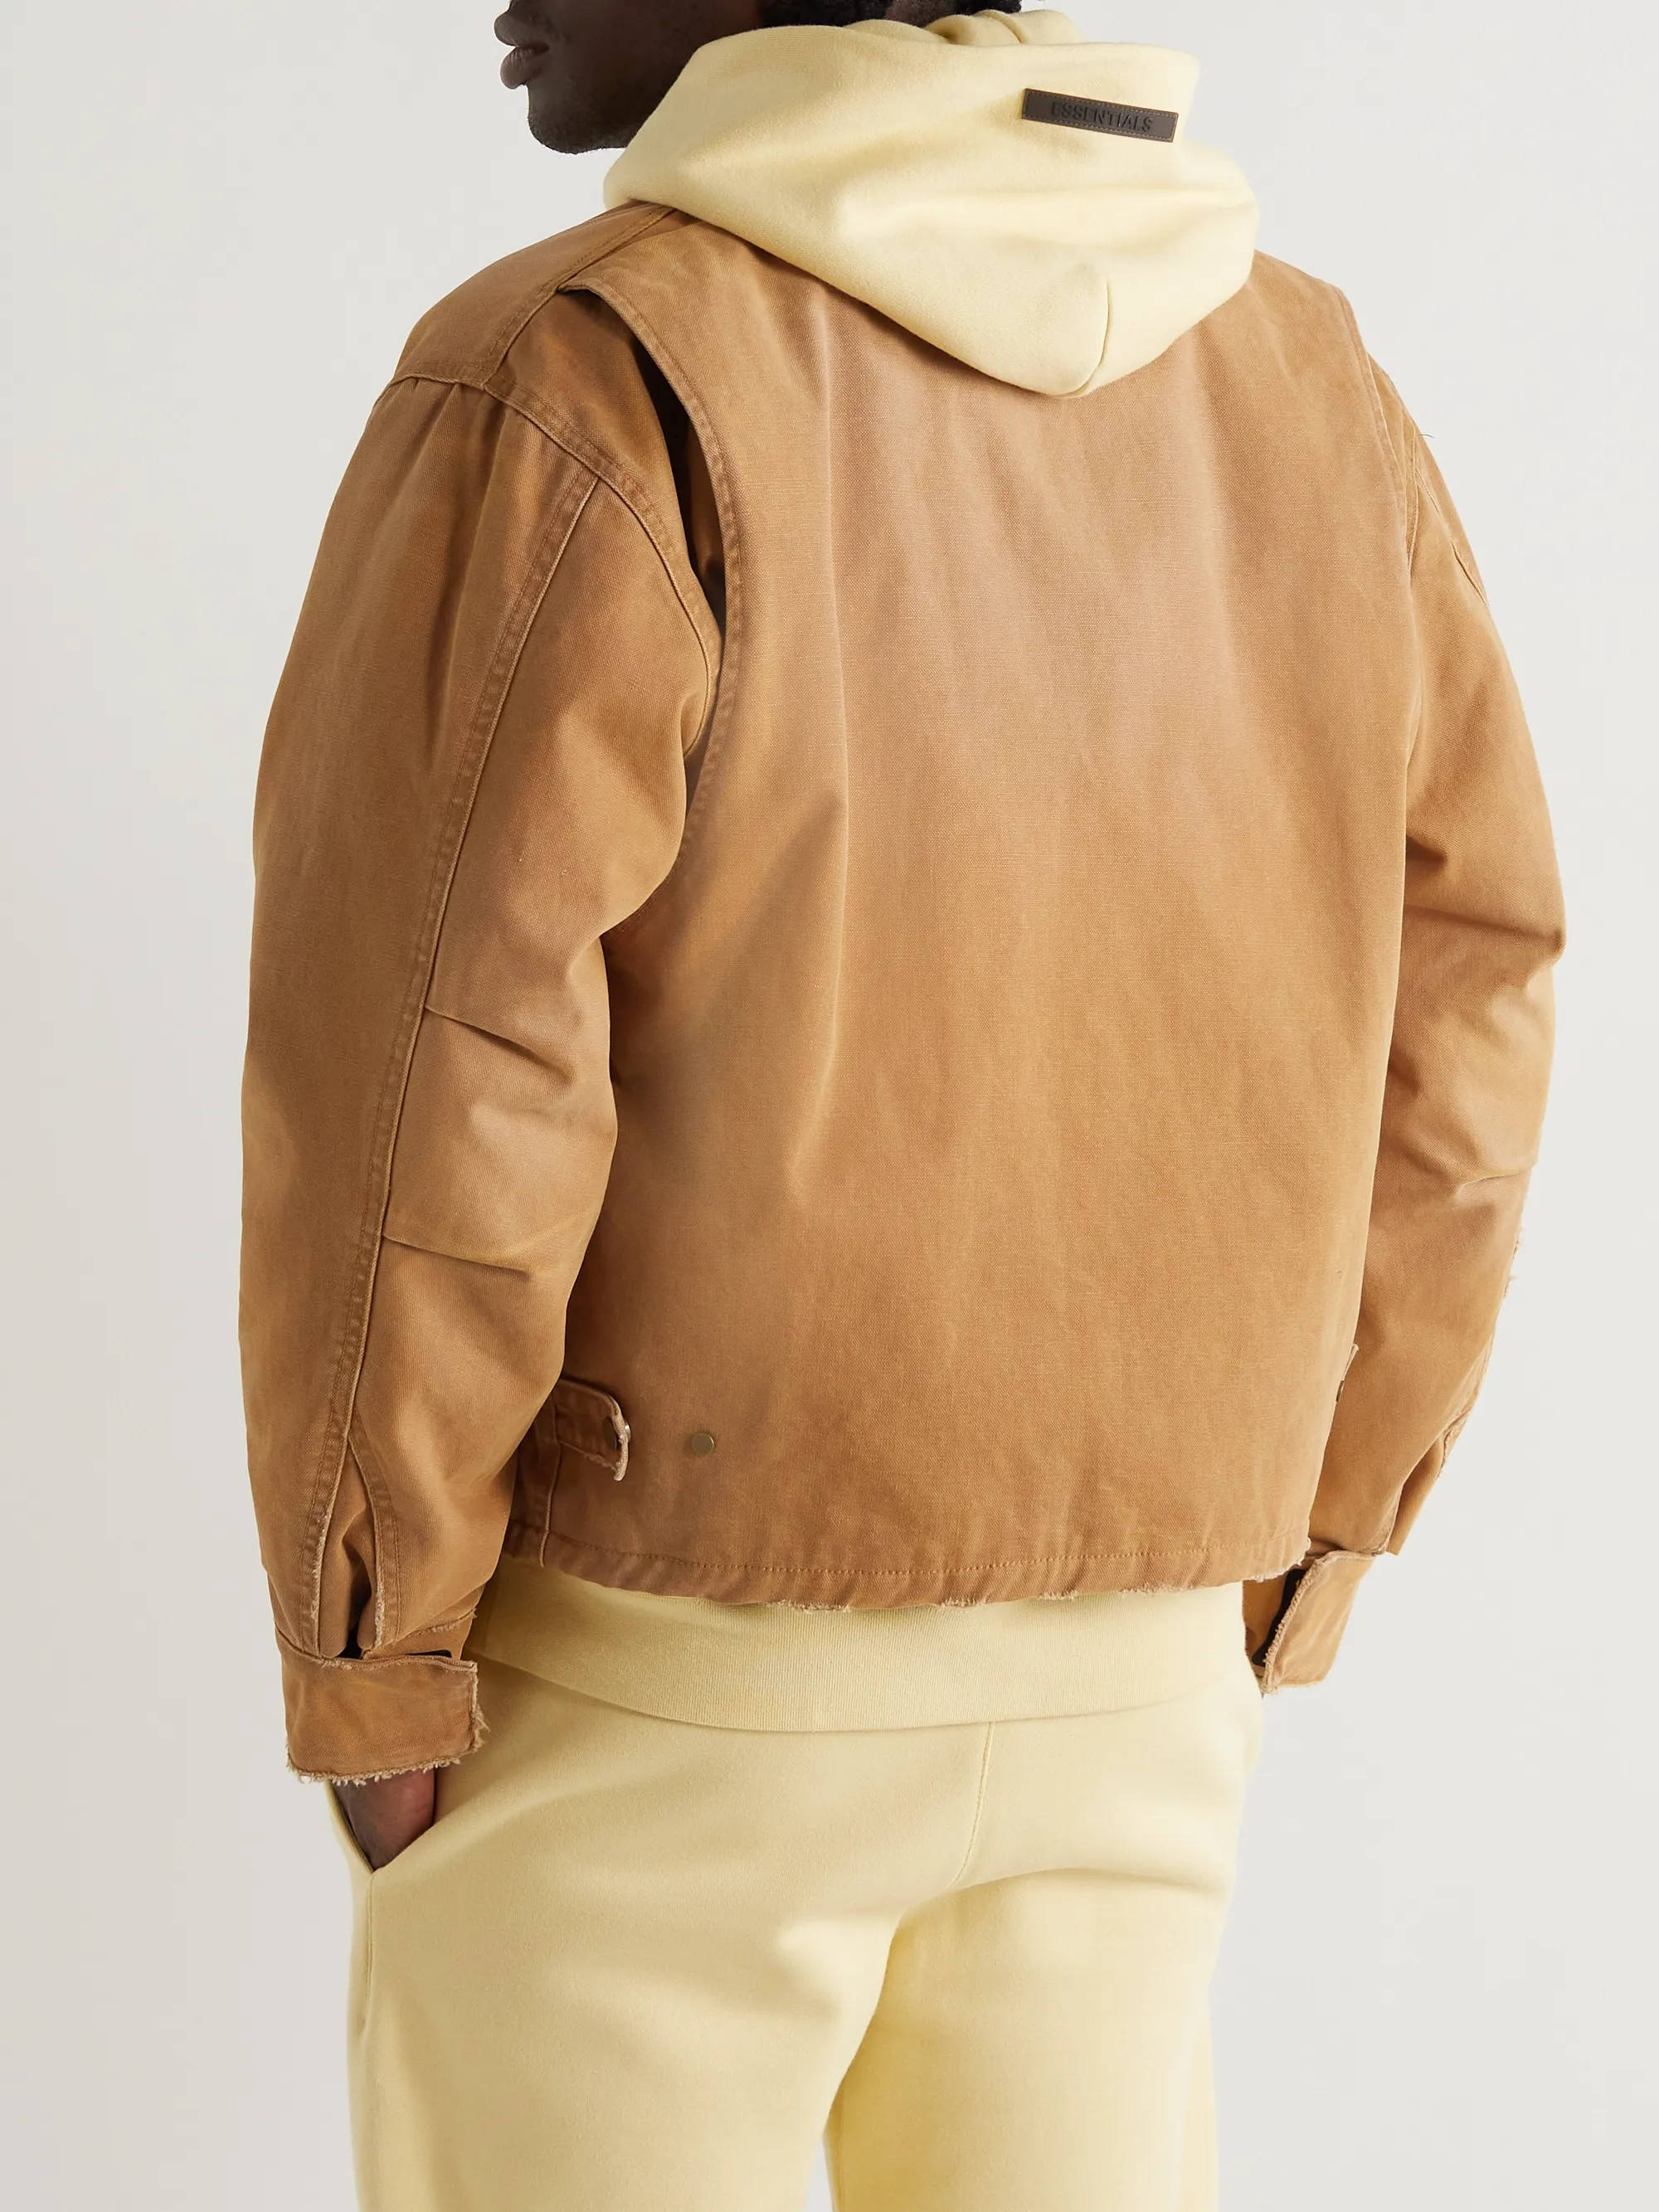 Fear Of God Canvas Work Vest Rust